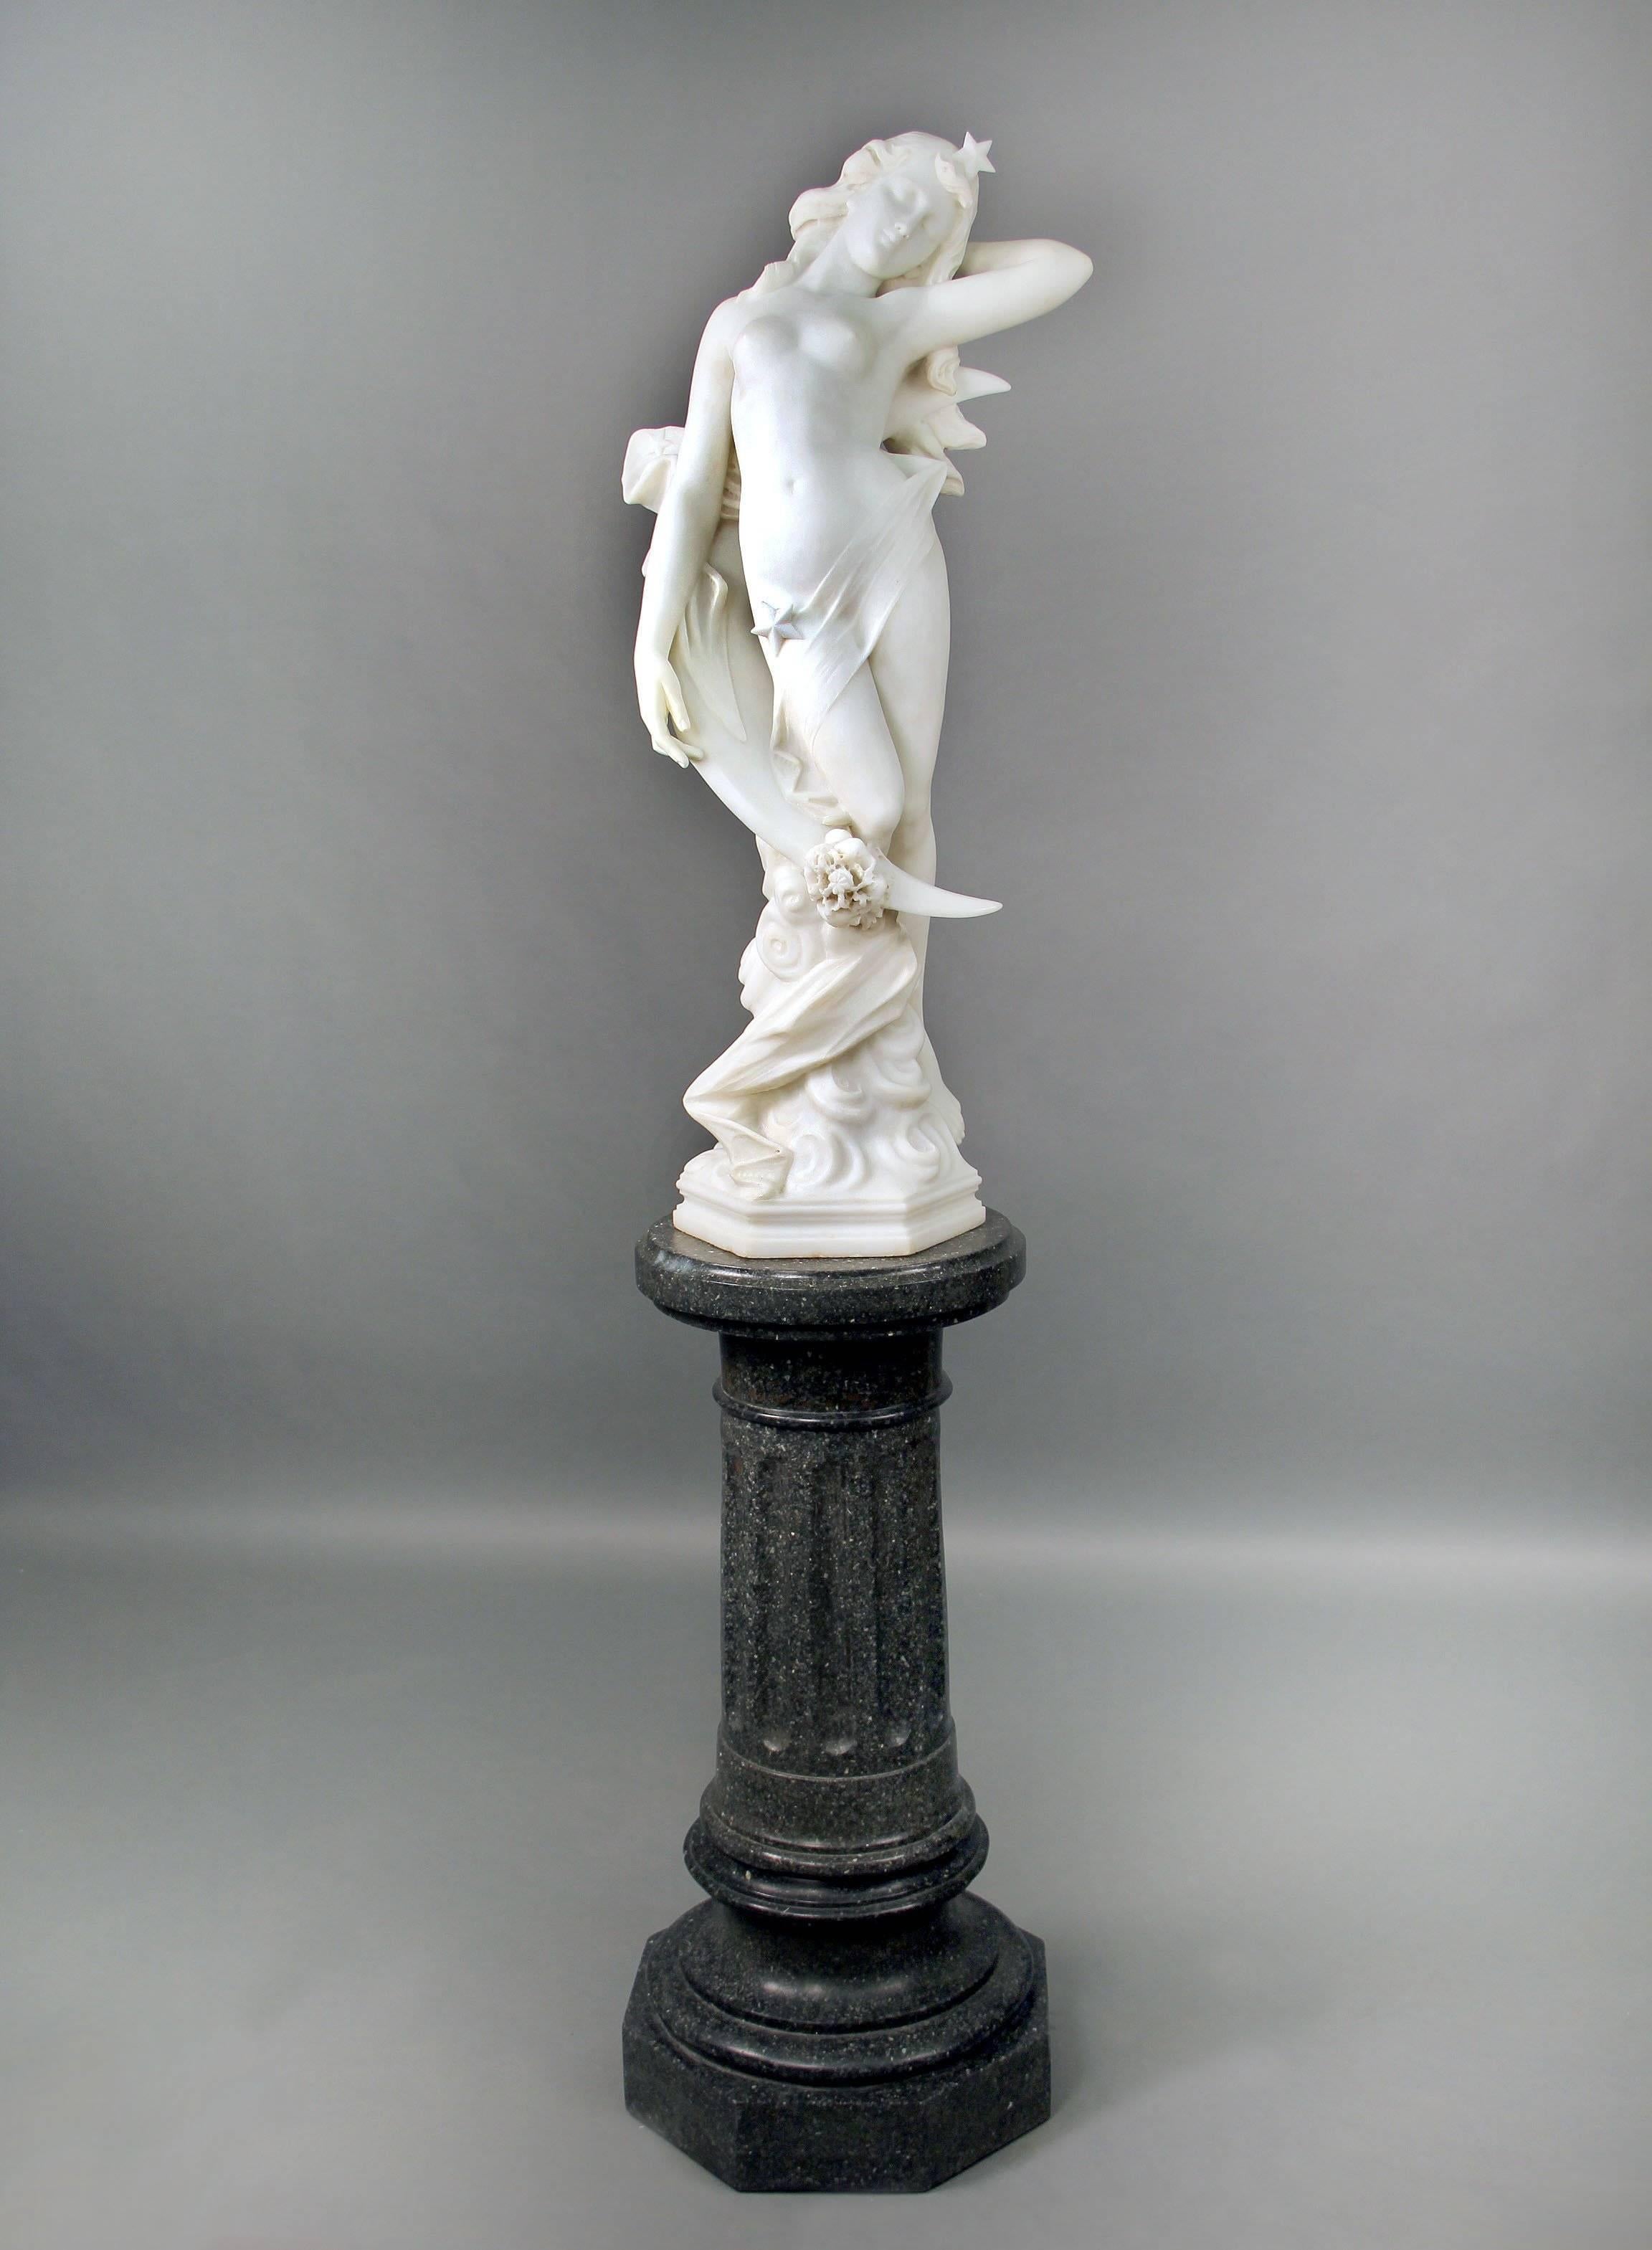 A lovely late 19th century Italian white carrara marble of a nude woman on a pedestal entitled 